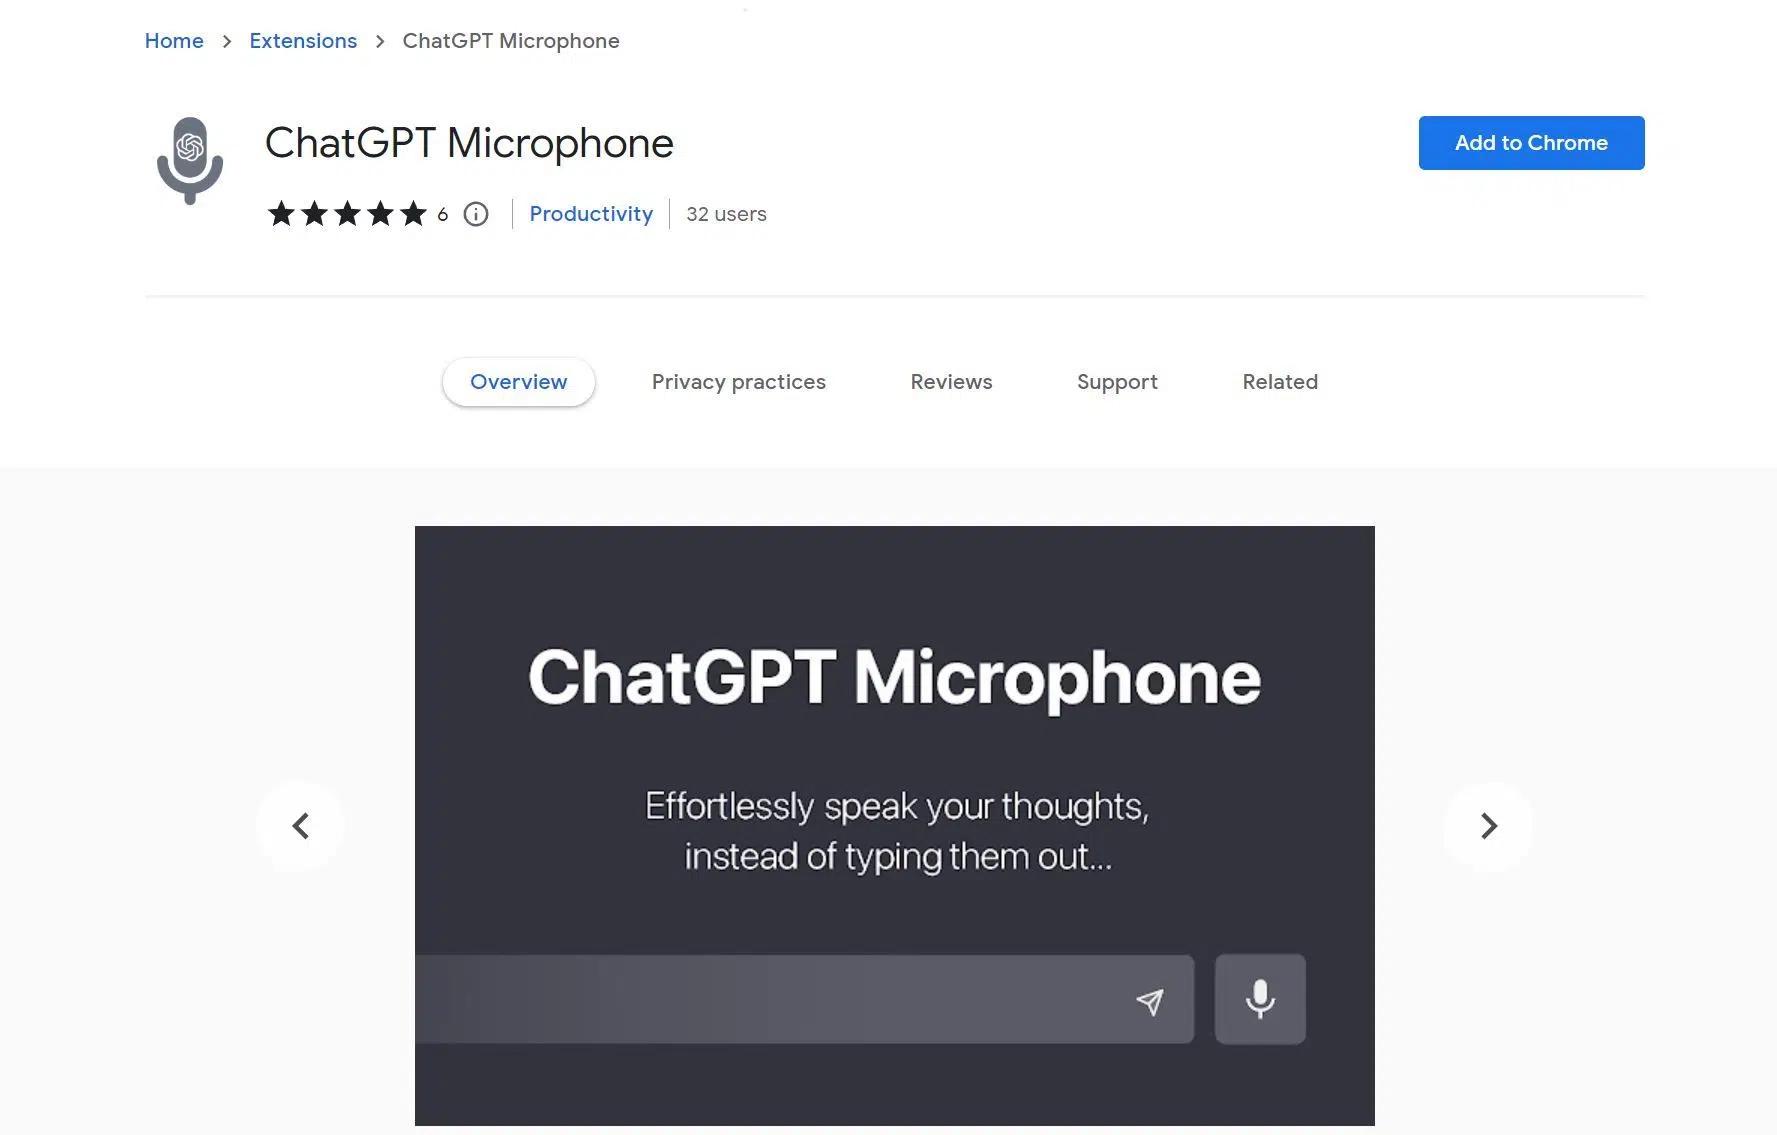 ChatGPT Microphonewebsite picture